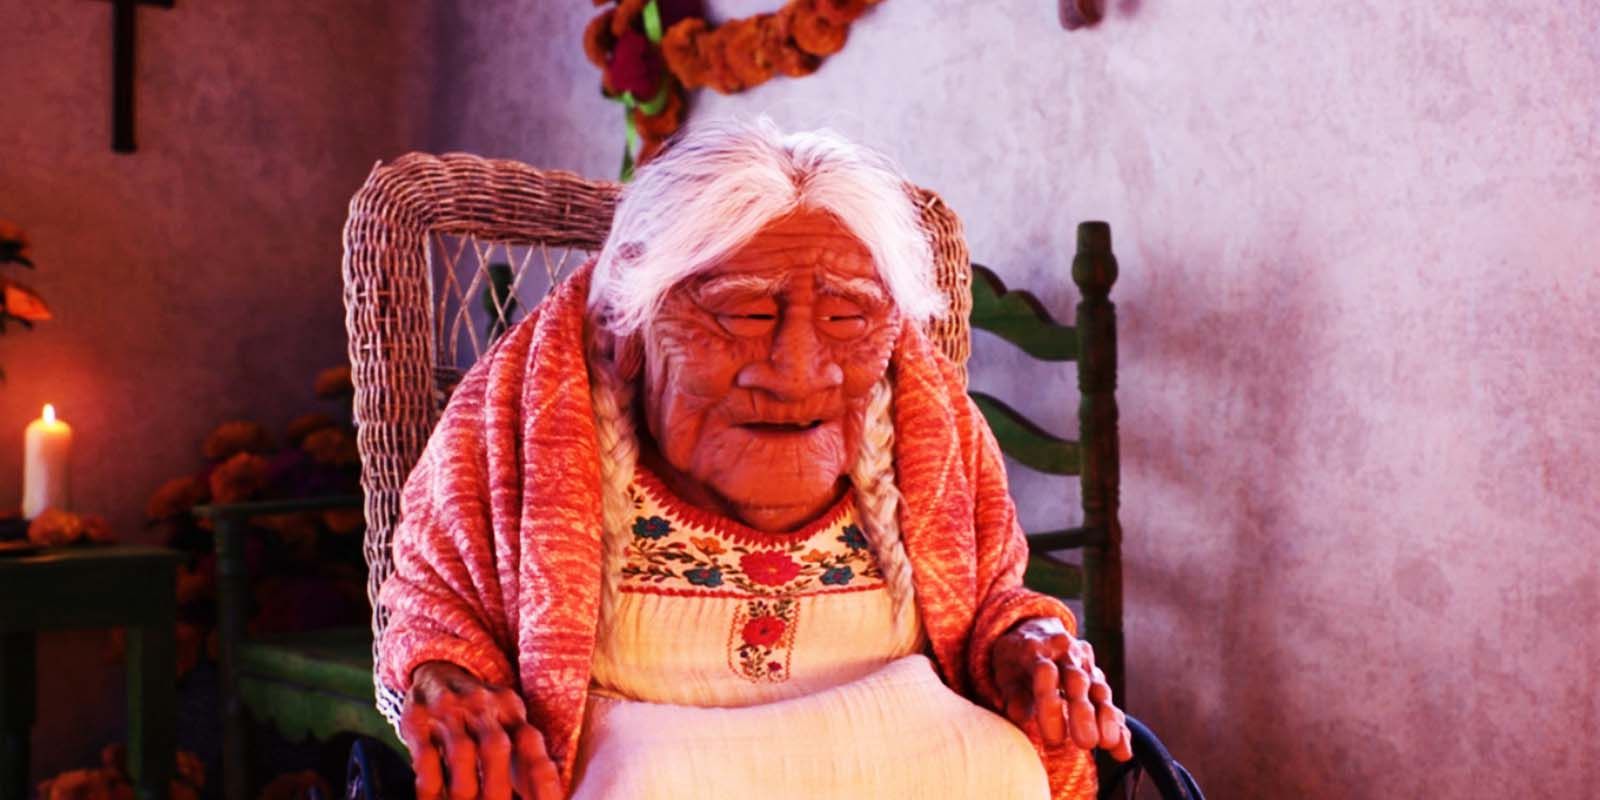 Coco Rivera sitting in a rocking chair in 2017's Coco